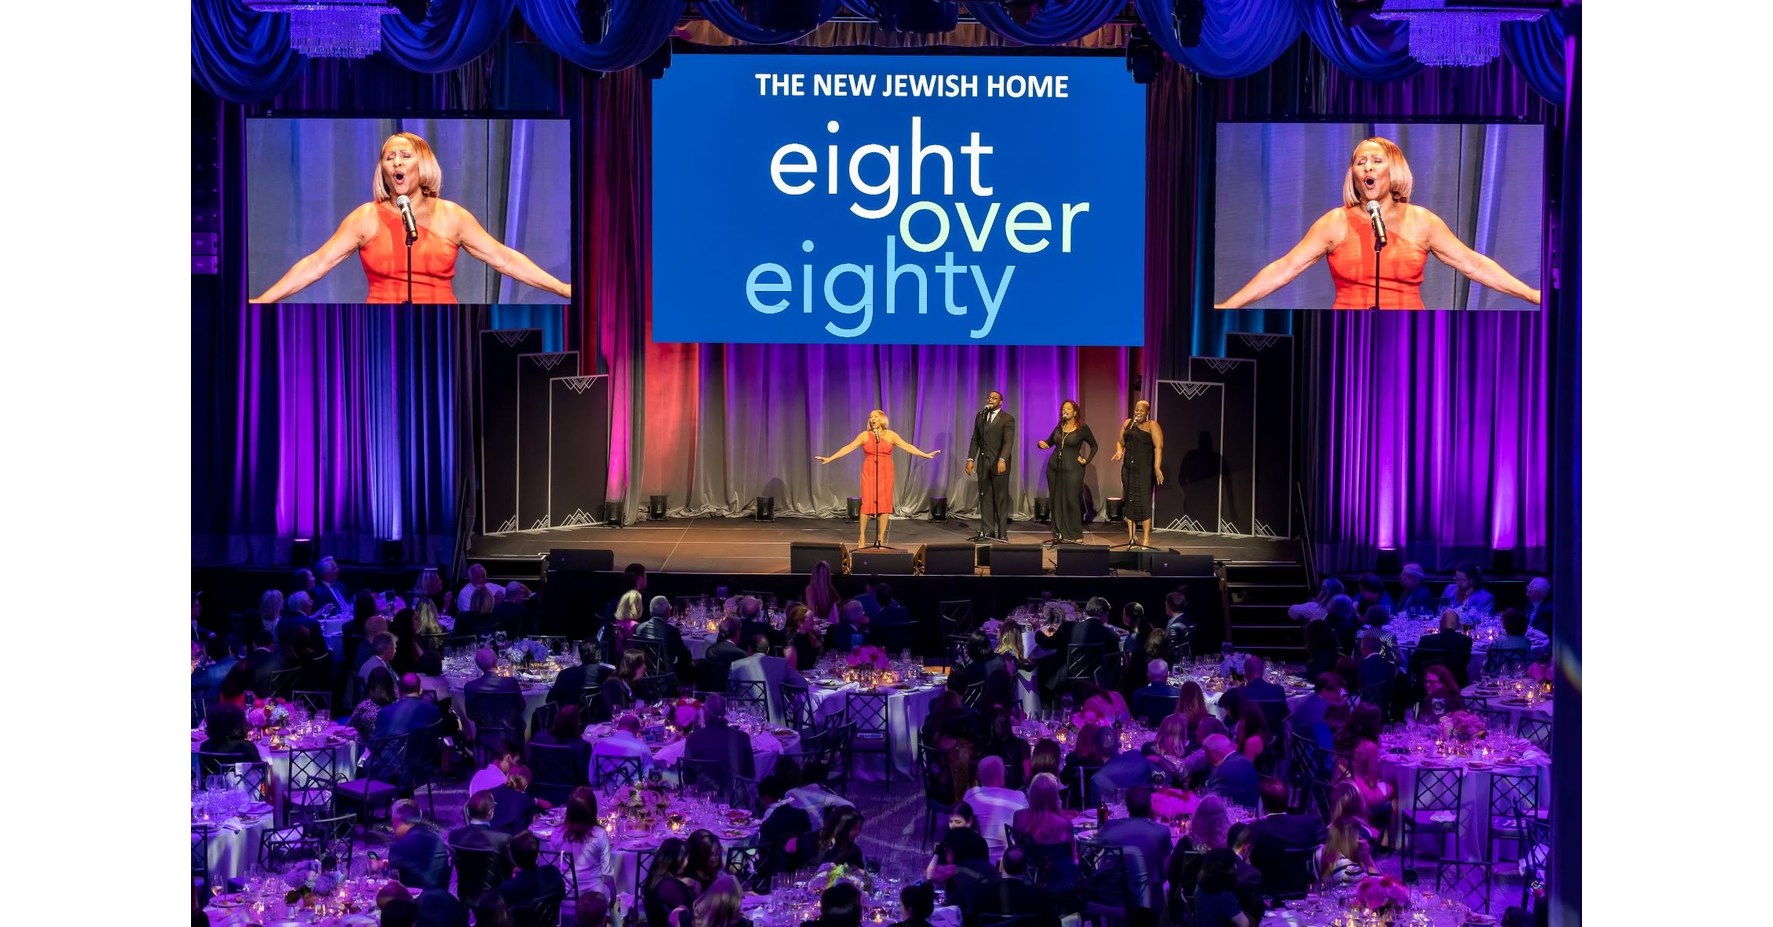 JoeTorre SafeAtHome on X: We would like to celebrate Joe Torre and the  other honorees at The New Jewish Home Eight Over Eighty ceremony on June  1st! Eight Over Eighty showcases eight